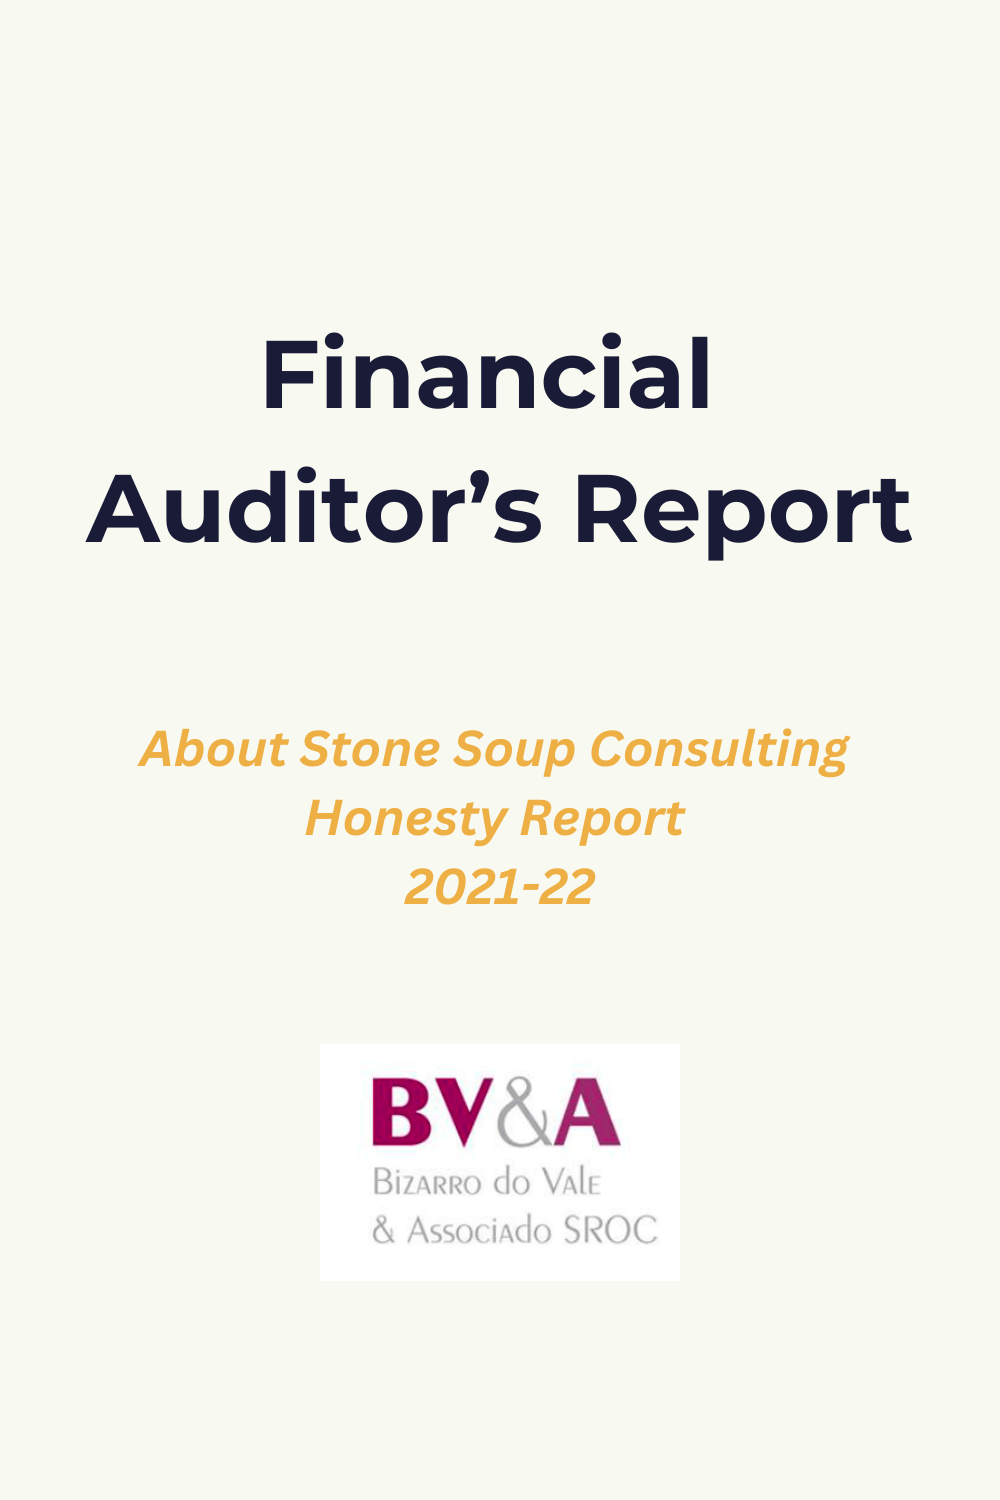 FINANCIAL AUDITOR'S REPORT